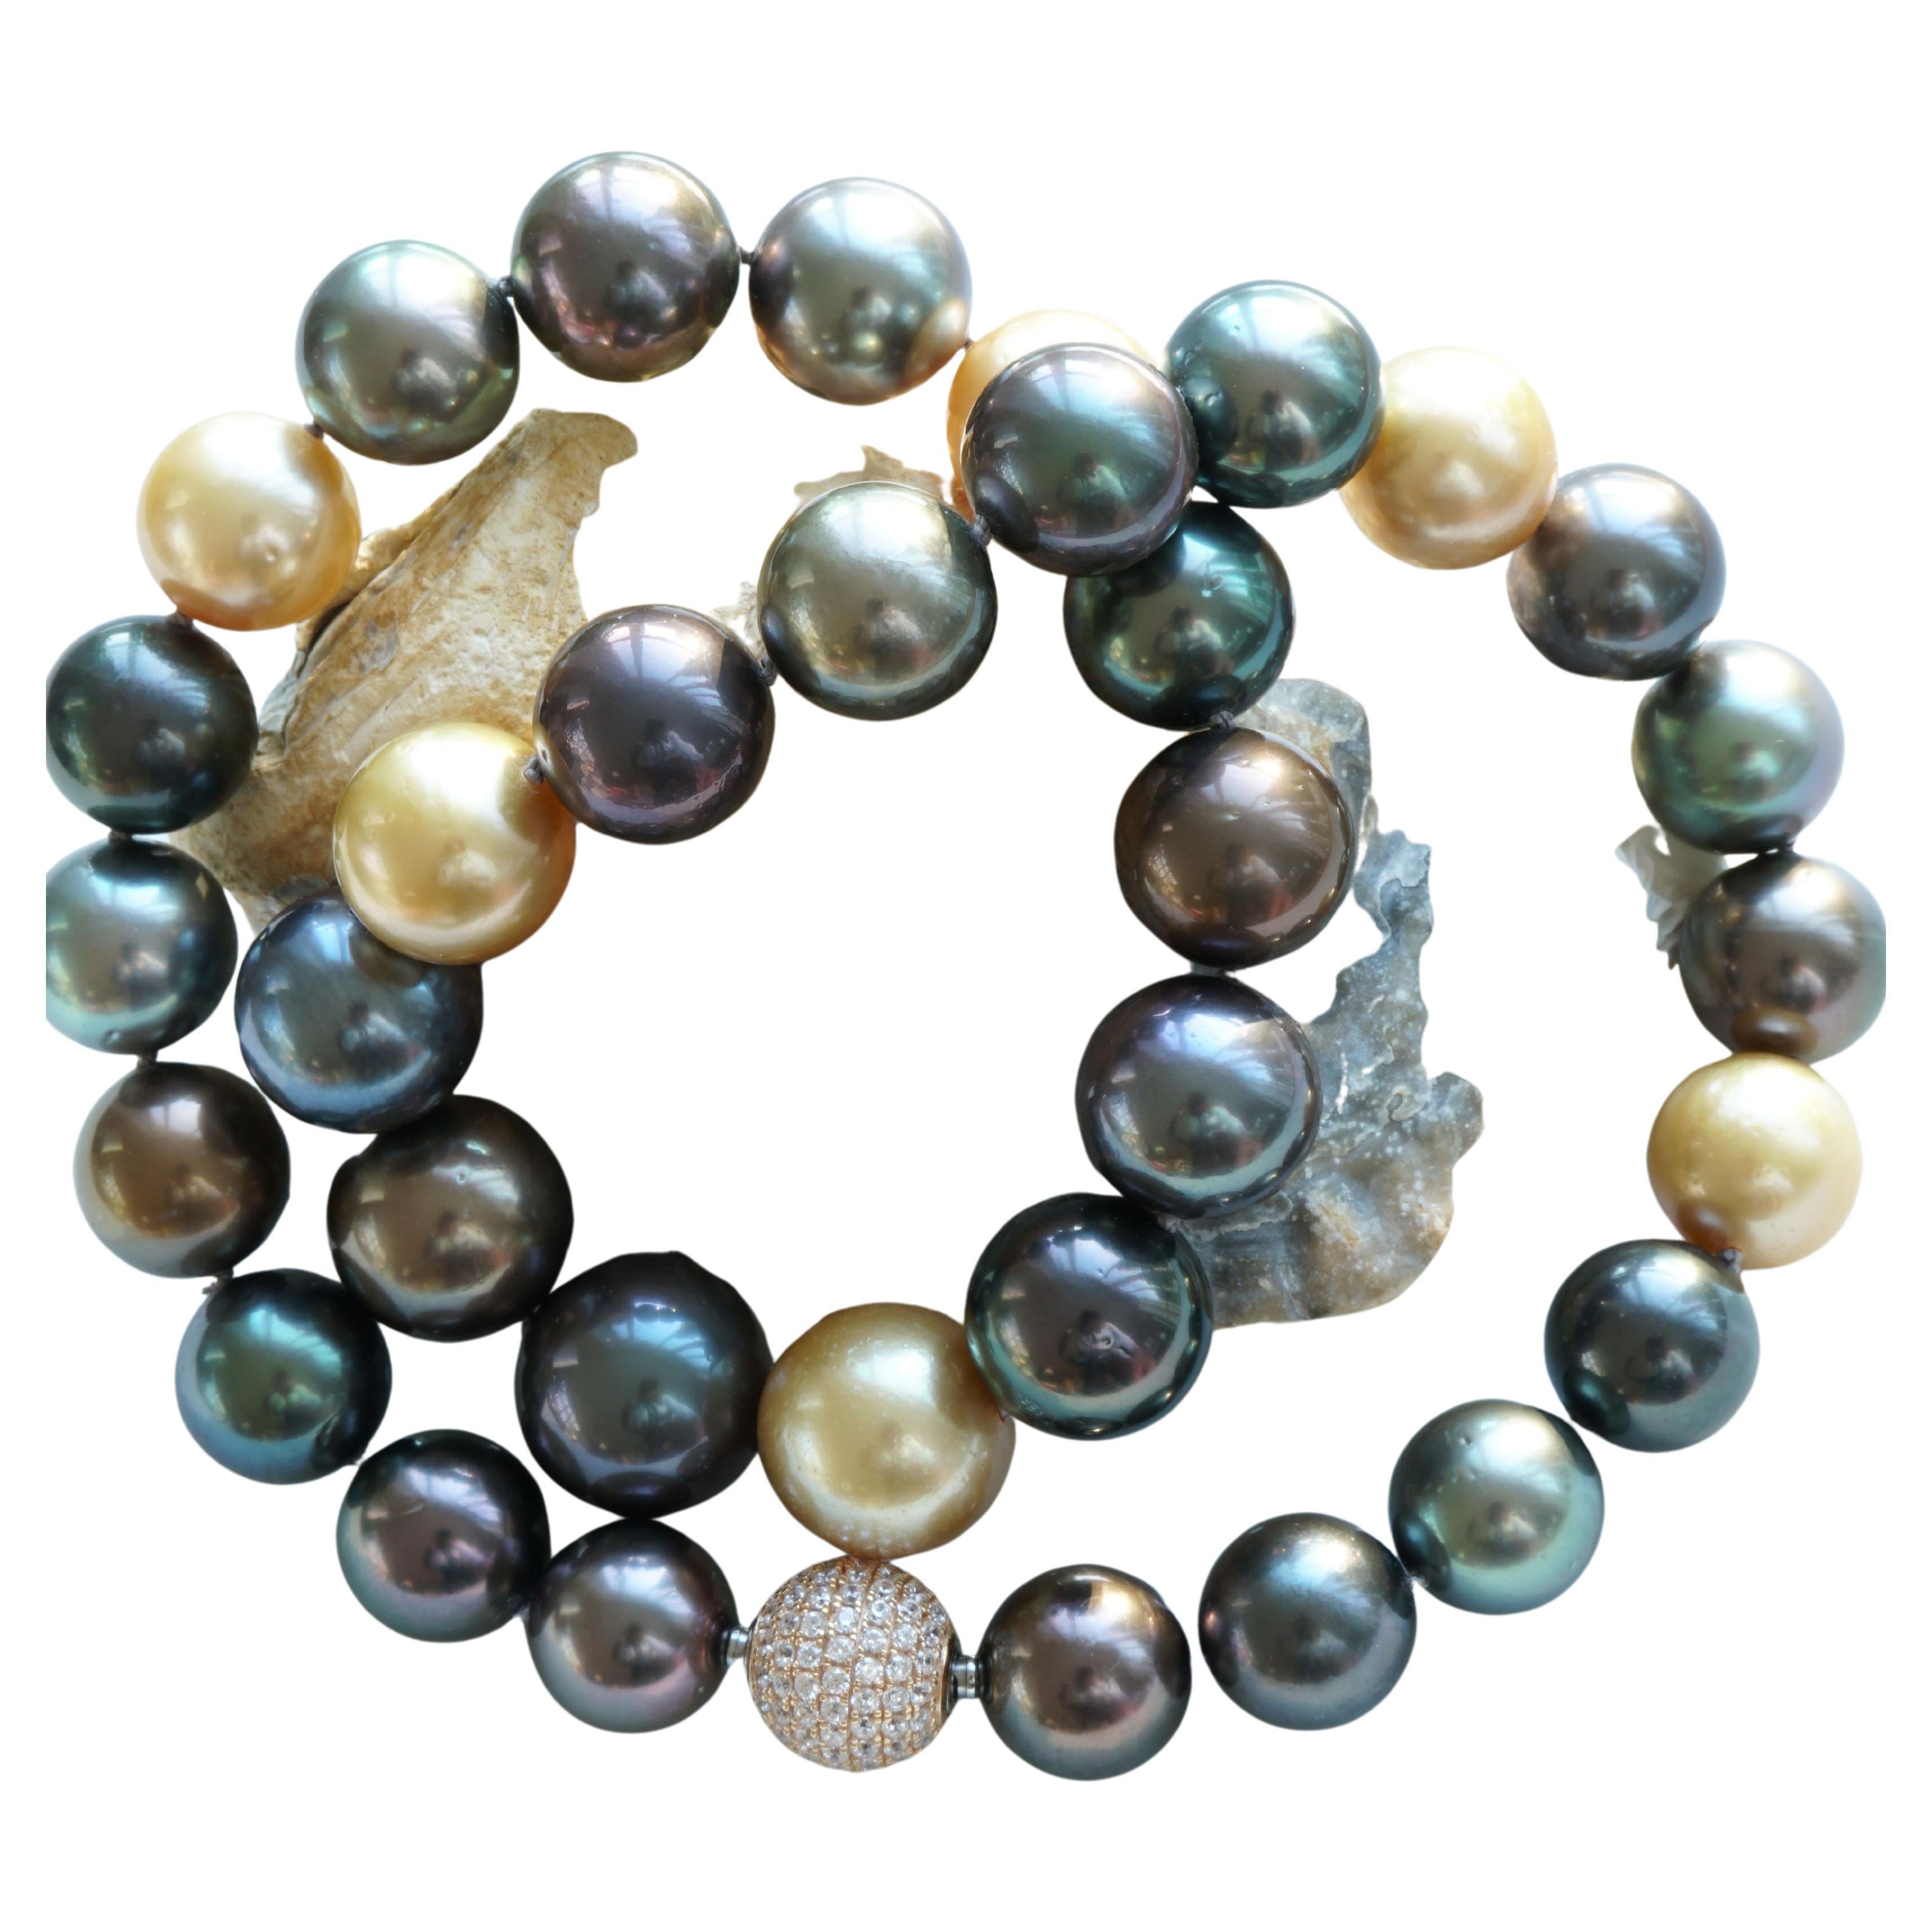 Top quality 33 round tahitian and southsea cultured pearl necklace in the most beautiful natural colors w.e.g. gold, mocha, grey, aubergine, pistachio, anthracite and with a very fine luster, pearls (AAA+-AAA) with few growth marks typical of